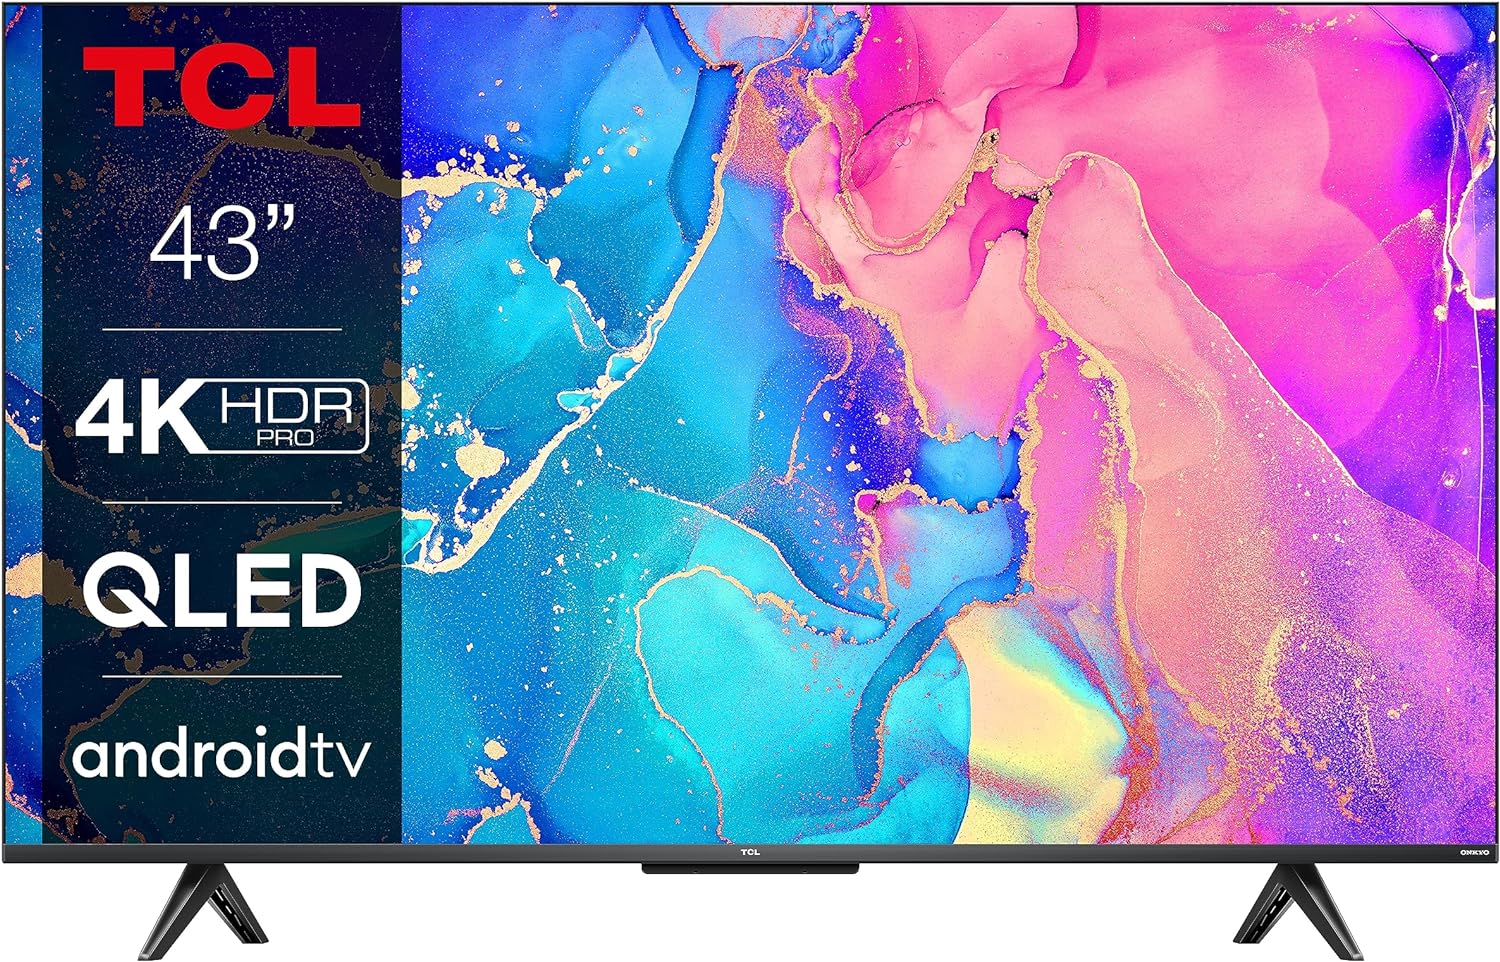 TCL 55C641K 55 - inch QLED Television, 4K Ultra HD, Android Smart TV (Game master, Dolby Atmos, Freeview Play, Motion clarity, Hands - Free Voice Control, compatible with Google assistant & Alexa) - Amazing Gadgets Outlet